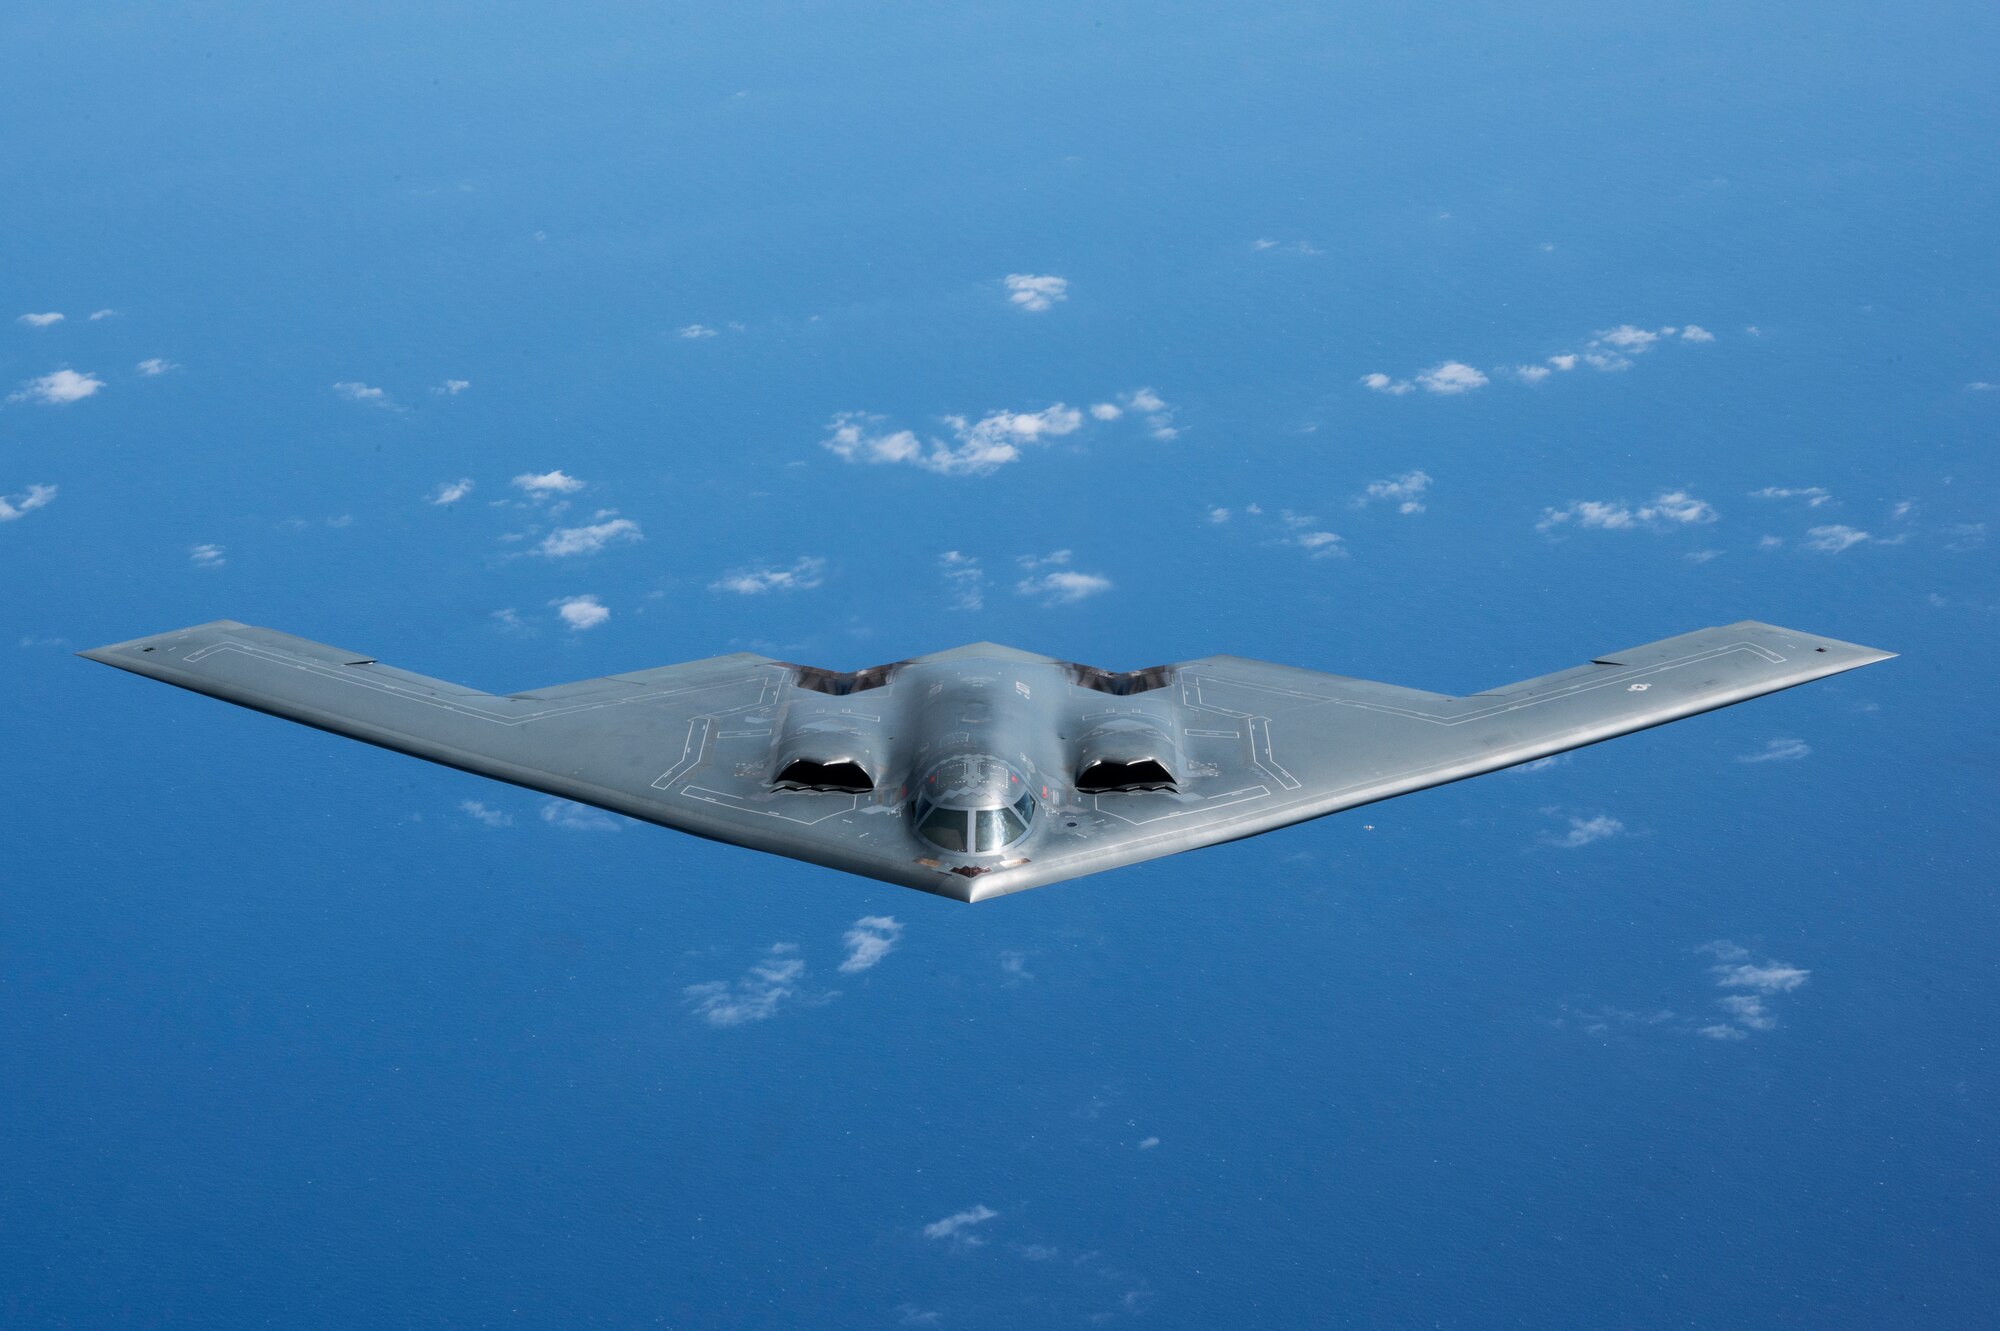 A B-2 Spirit from Whiteman Air Force Base, Missouri, flies alongside a KC-135 Stratotanker from the Alaska Air National Guard during a training mission with the Royal Australian Air Force in the Indo-Pacific region, March 23, 2022. (U.S. Air Force photo by Tech. Sgt. Hailey Haux)